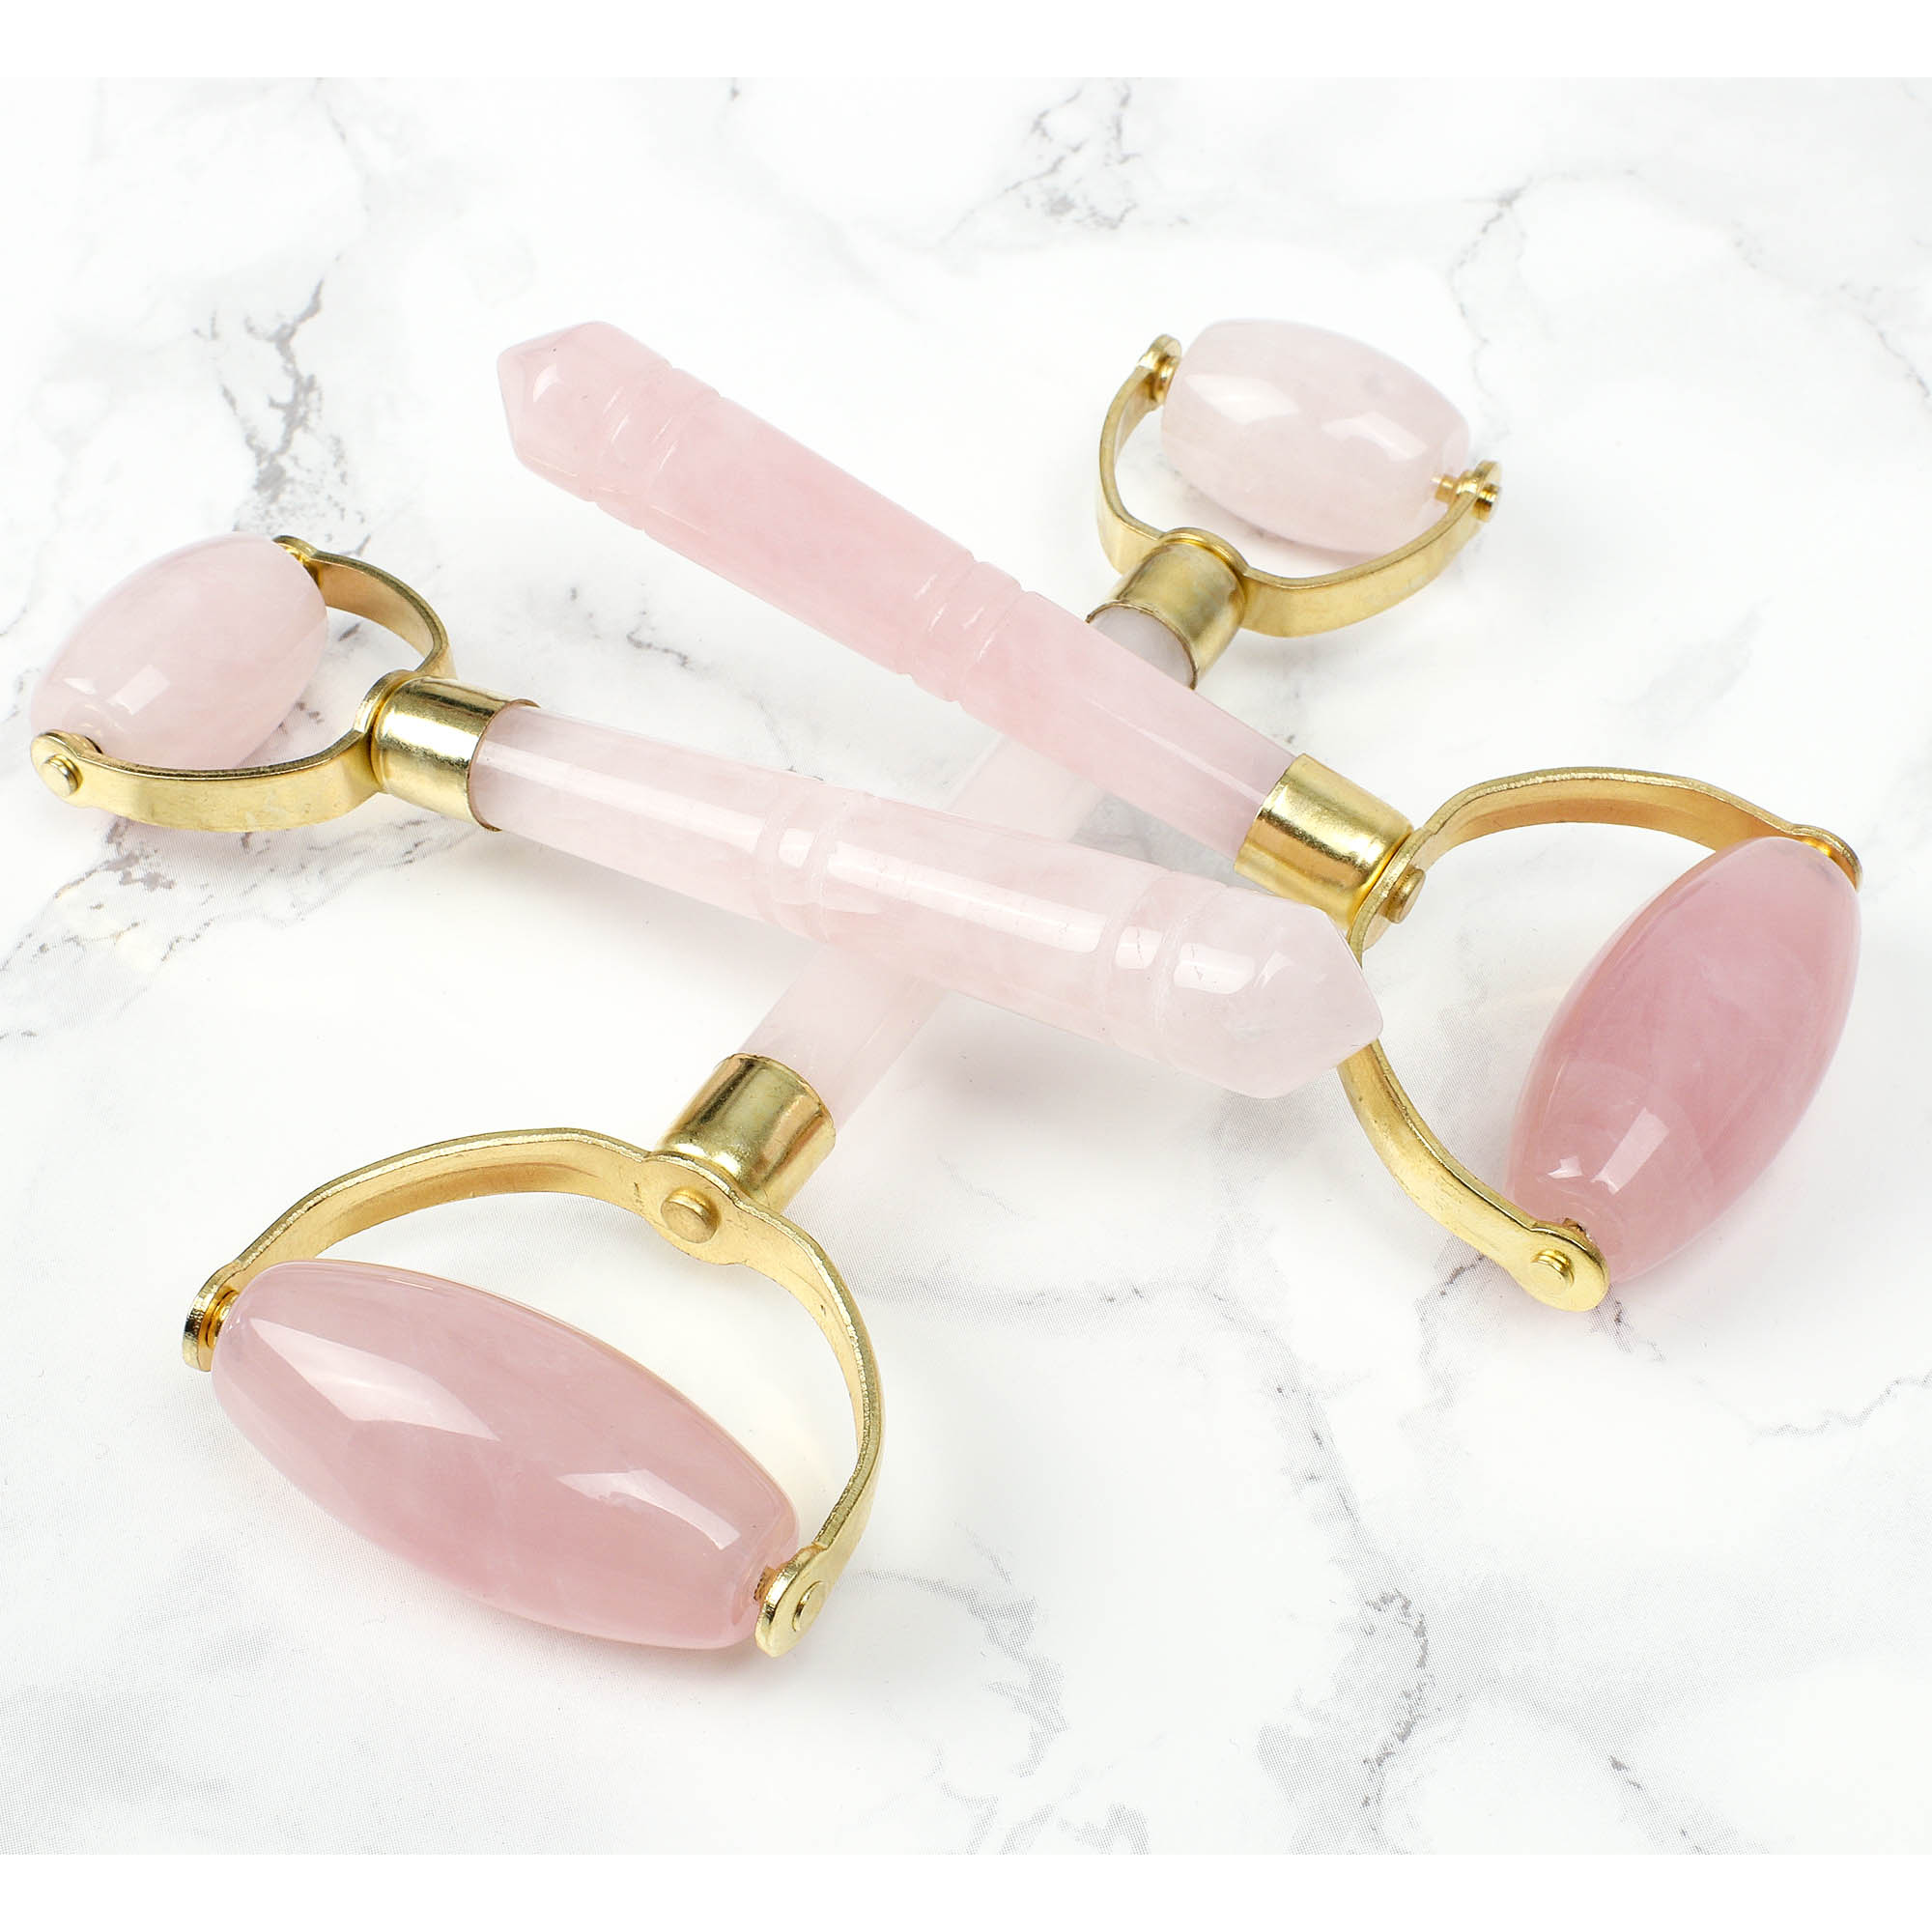 Double Headed Rose Quartz Roller - Natural Chemical Free Crystal in a Silk Lined Box